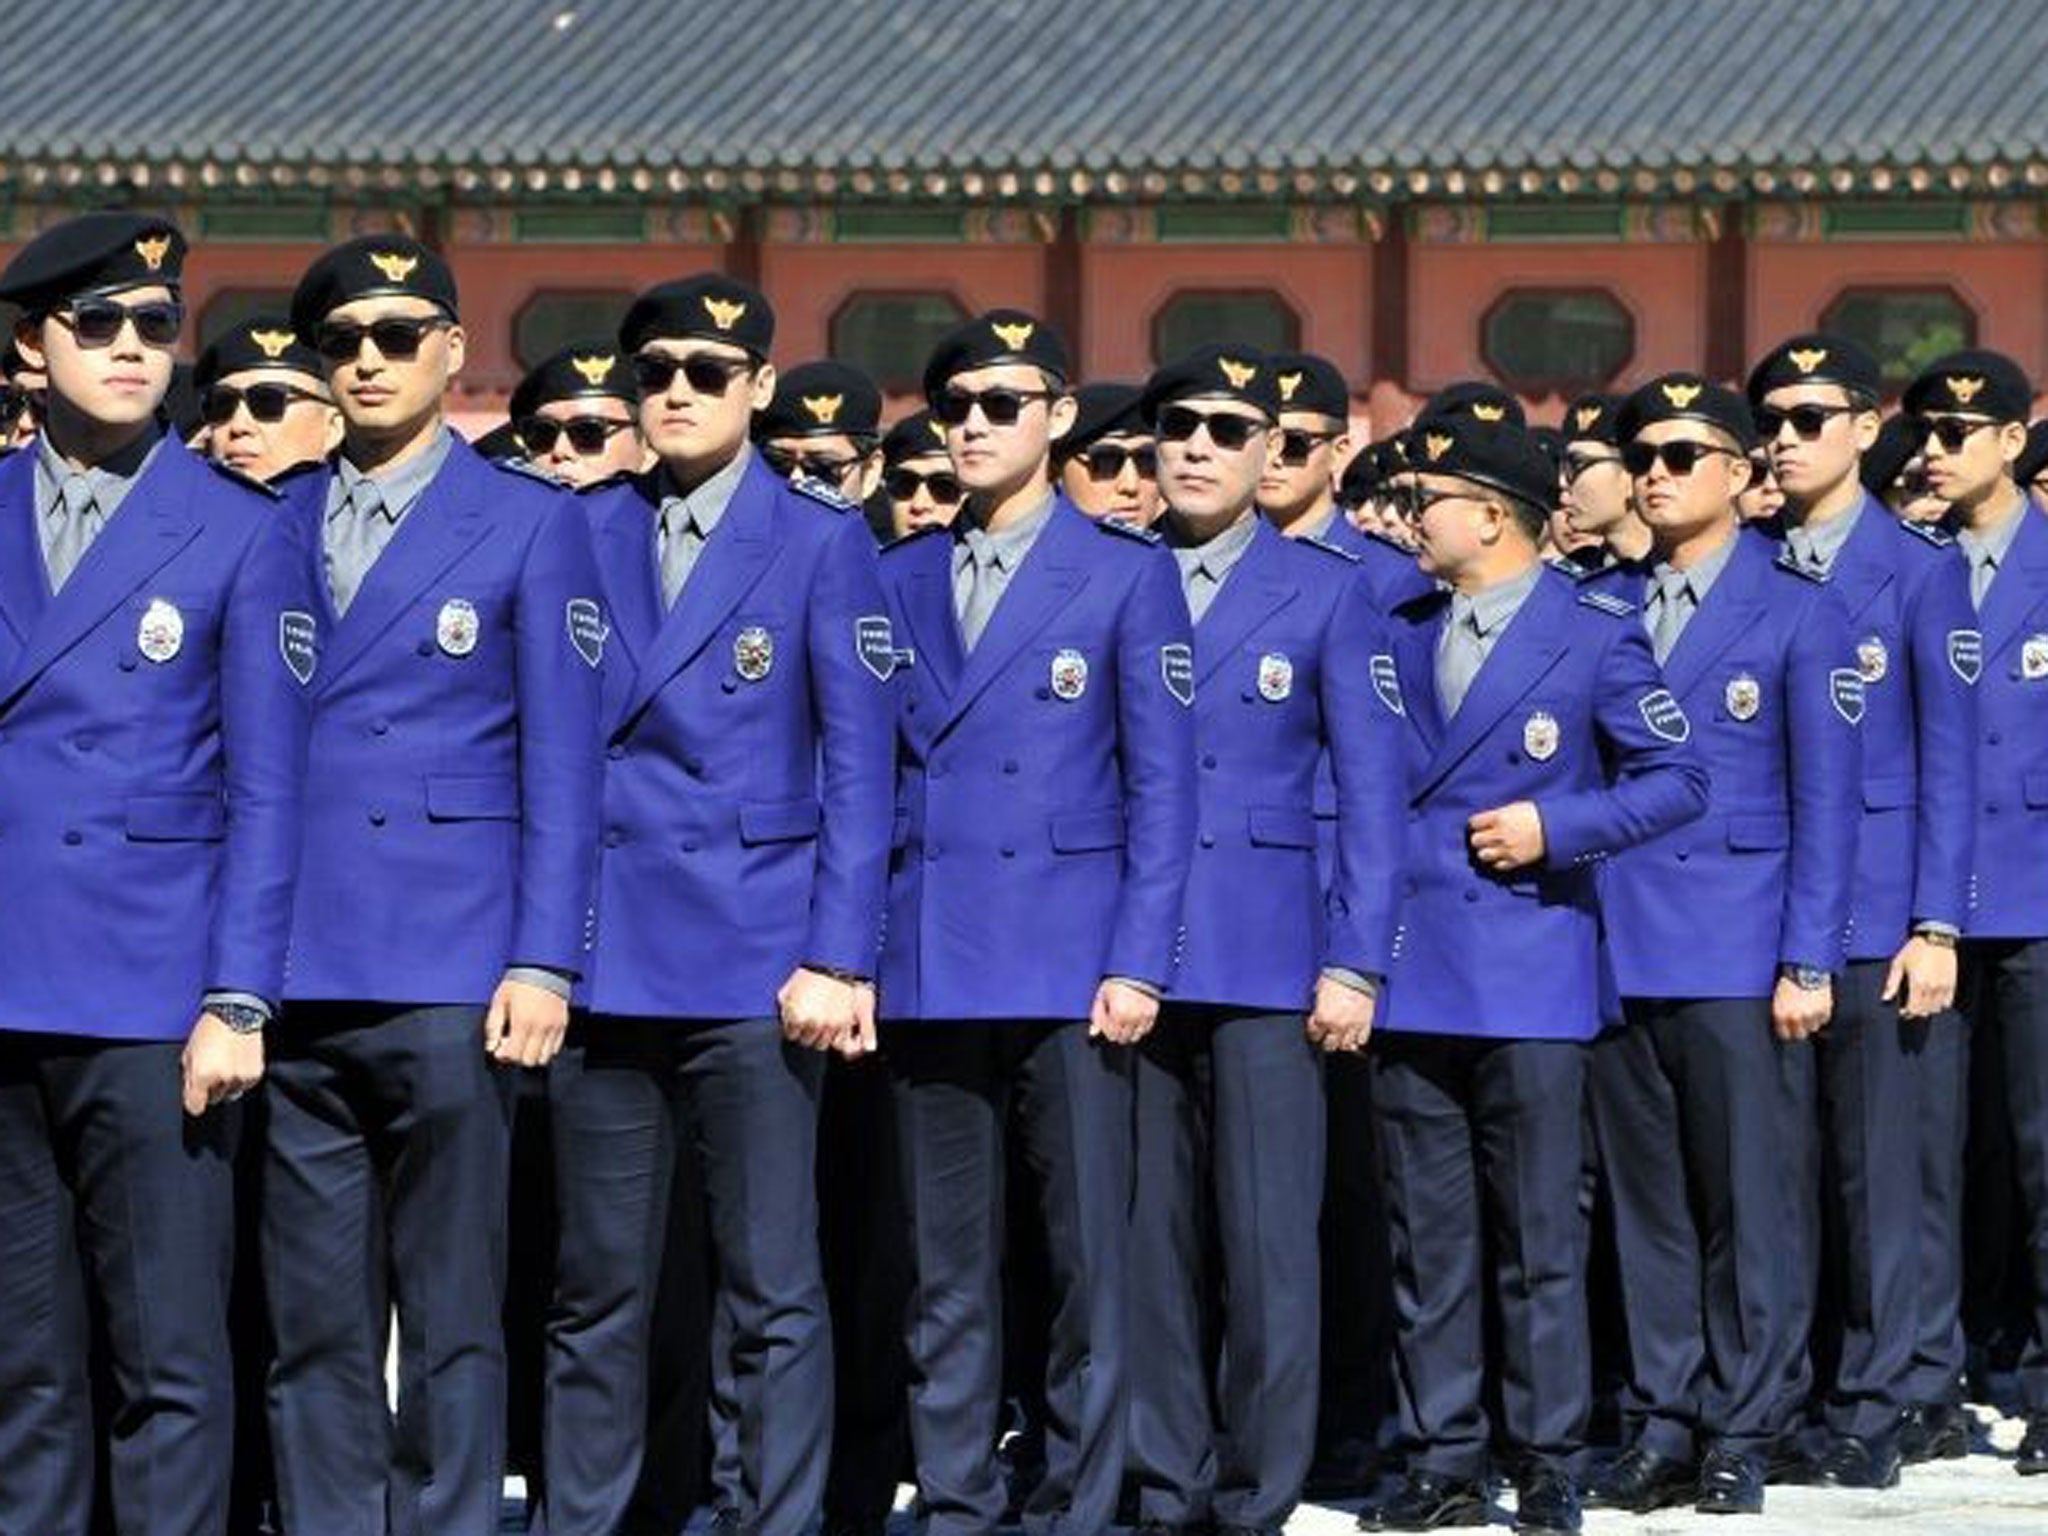 South Korean "tourist police" officers attend their inauguration ceremony at Gwanghwamun square in Seoul on 16 October, 2013.